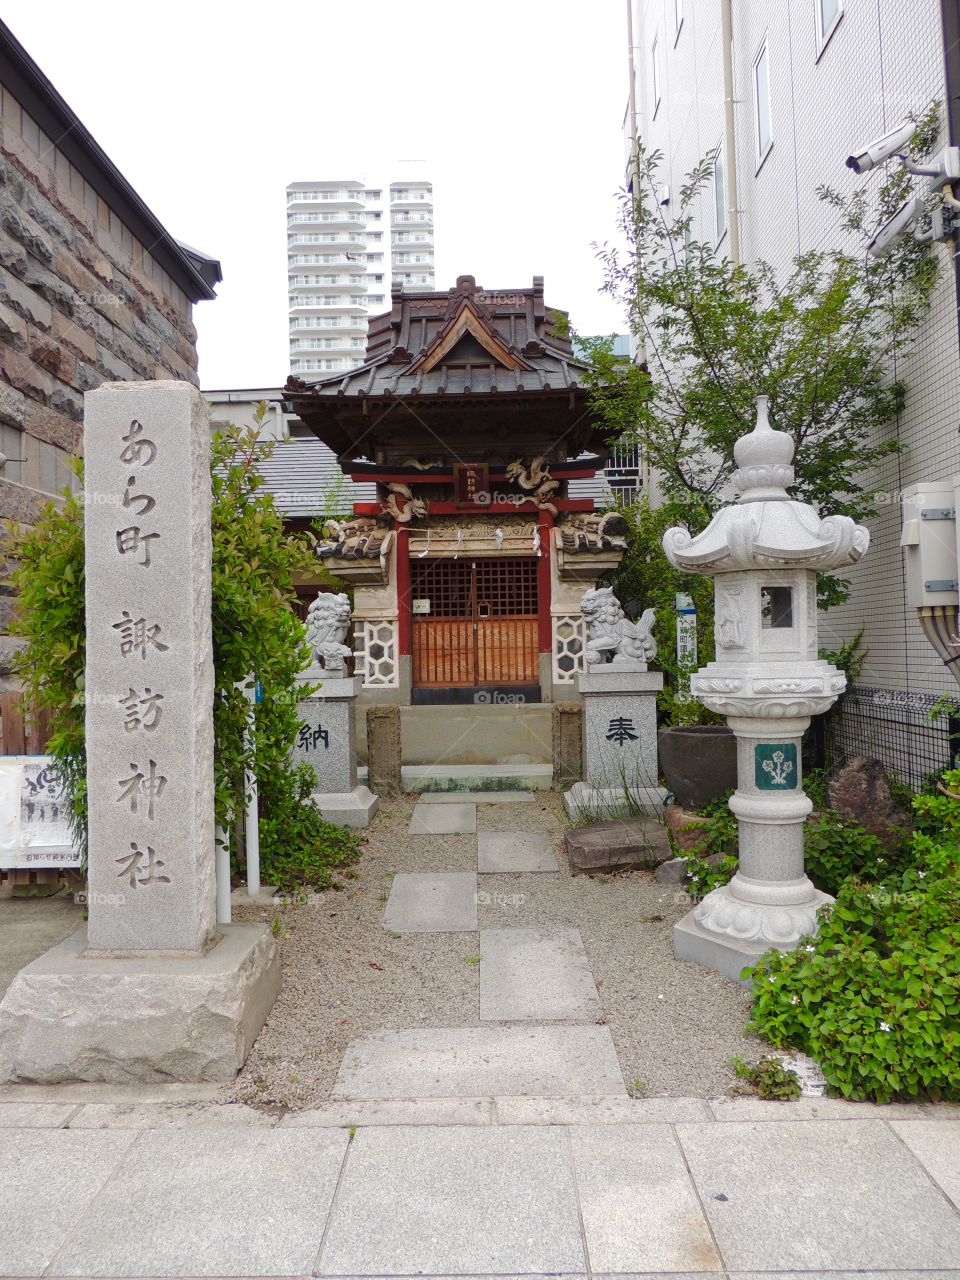 Temple in the street